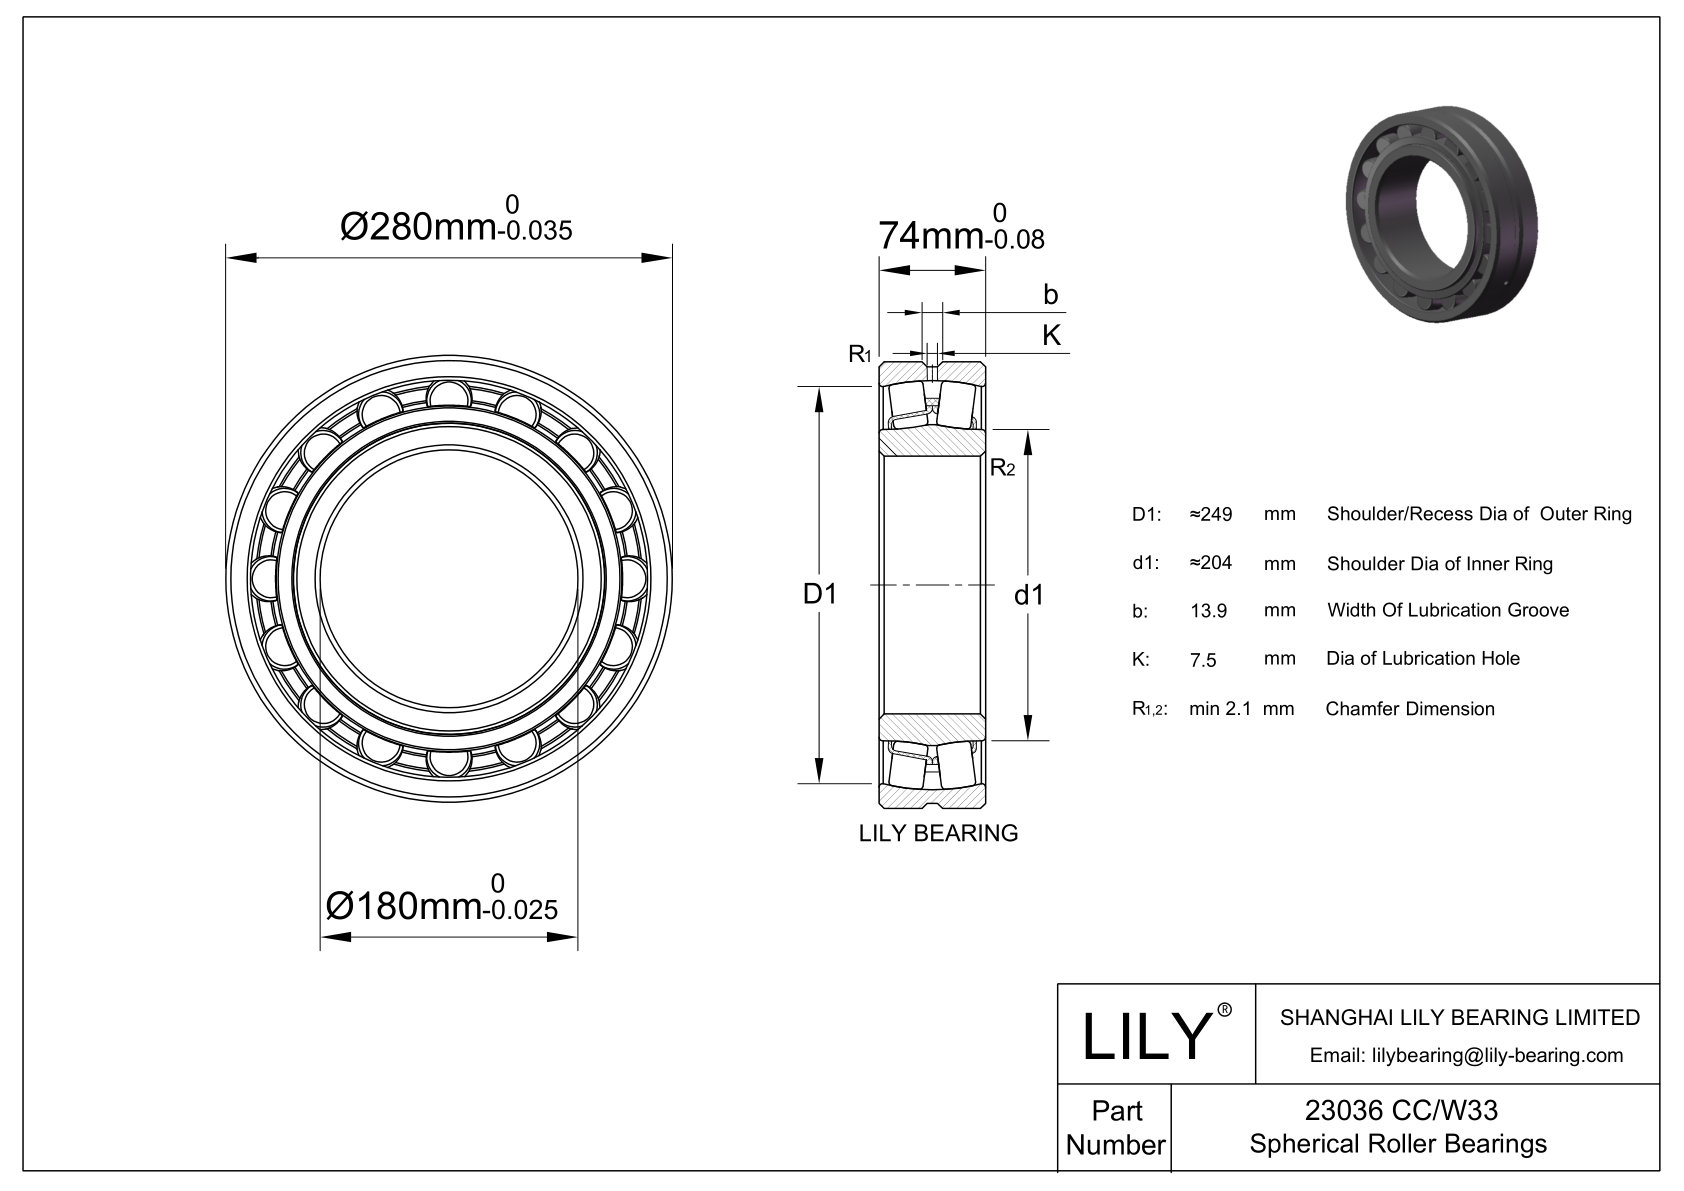 23036 CC/W33 Double Row Spherical Roller Bearing cad drawing